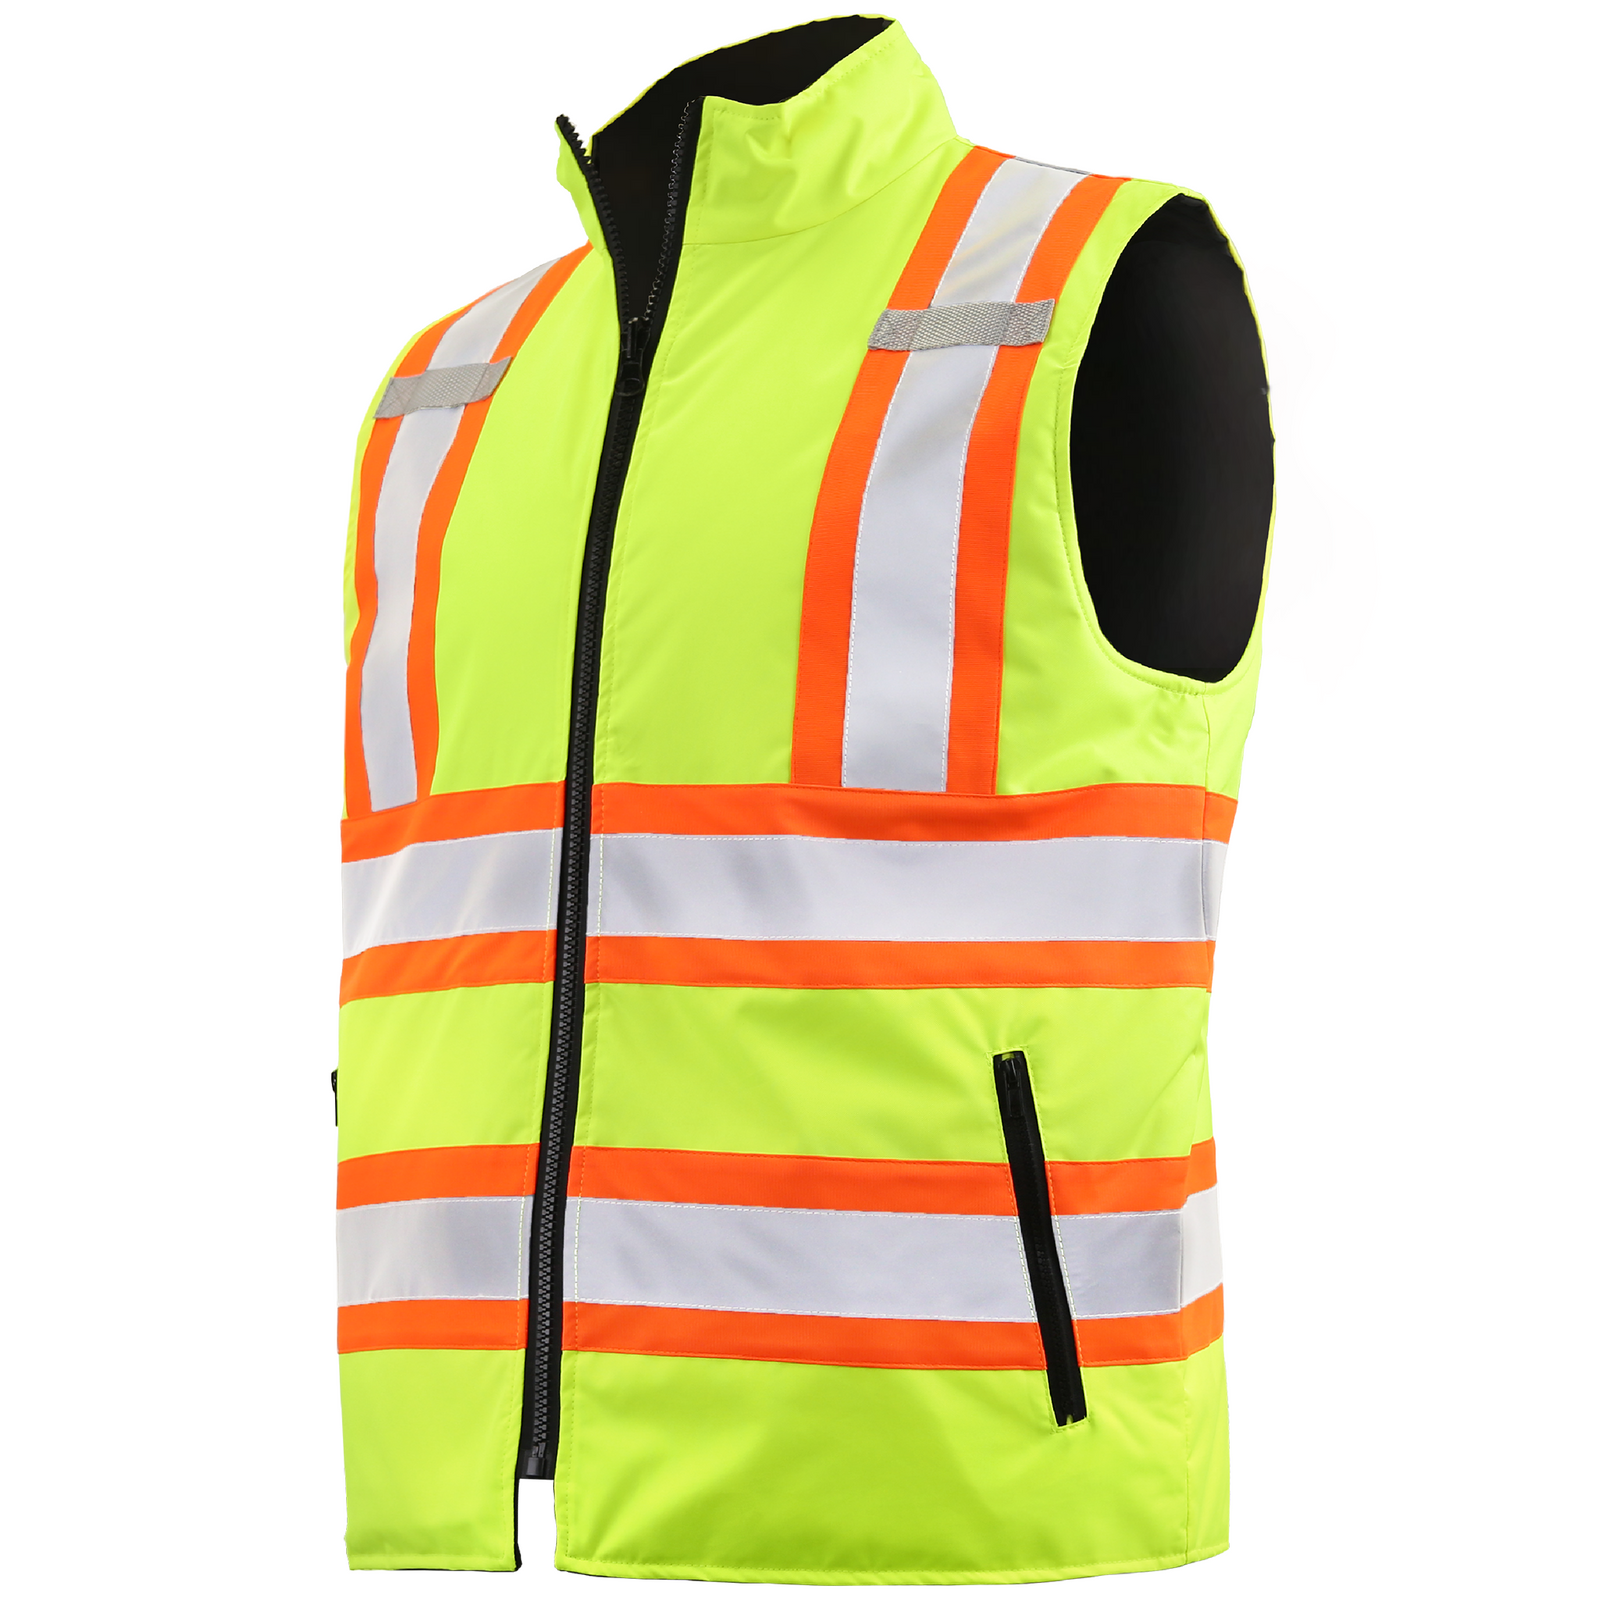 Diagonal view of the JORESTECH® two tone yellow and orange reflective insulated safety vest